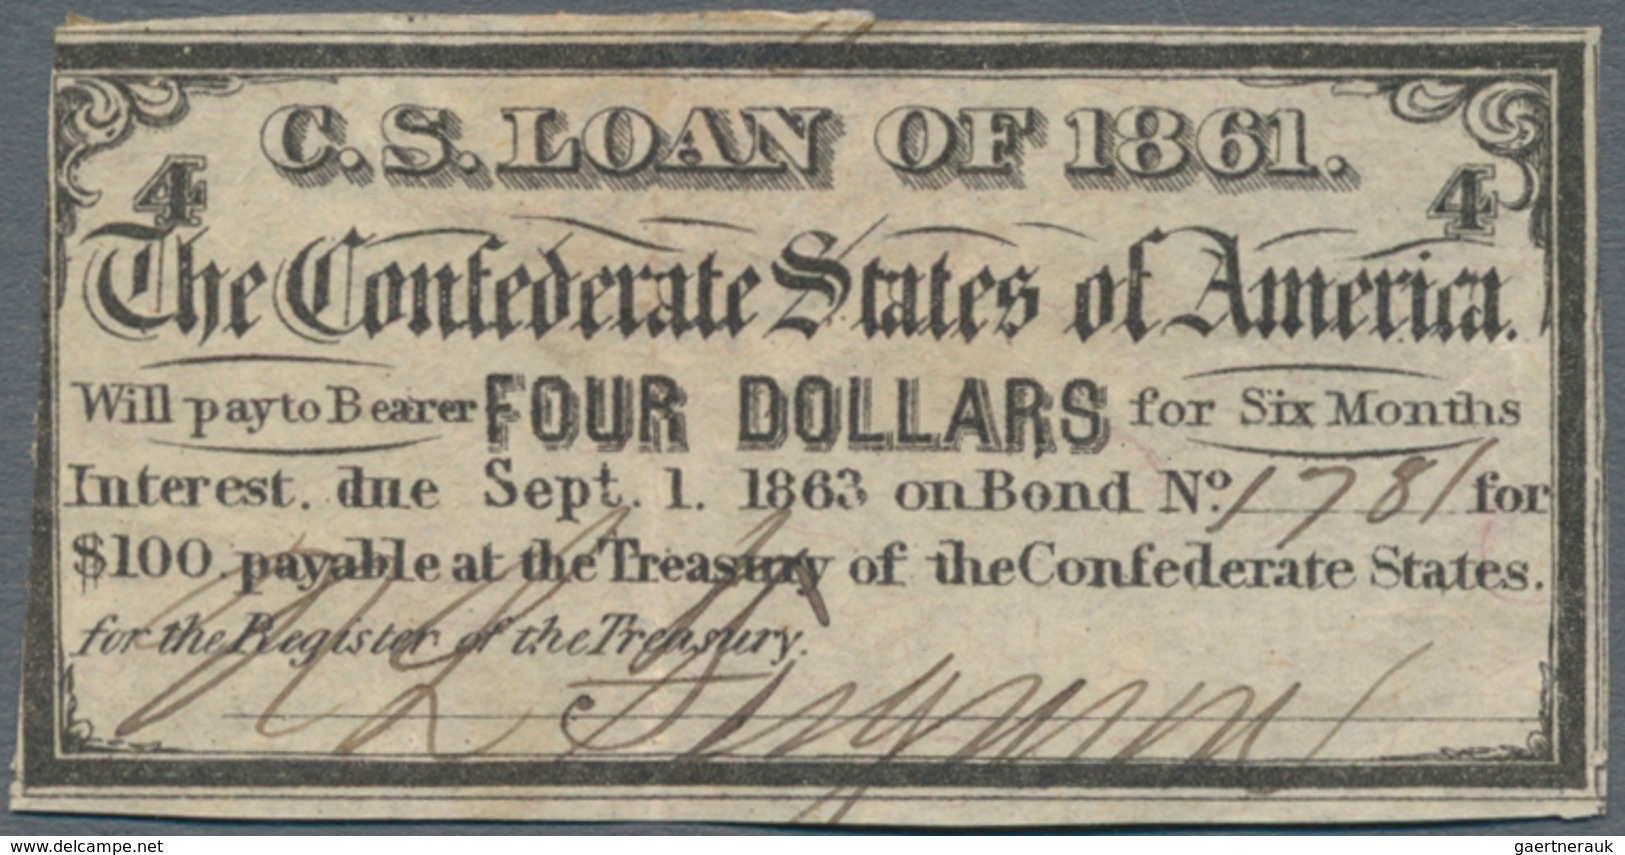 United States of America - Confederate States: Interesting lot with 9 Confederate Banknotes and Loan